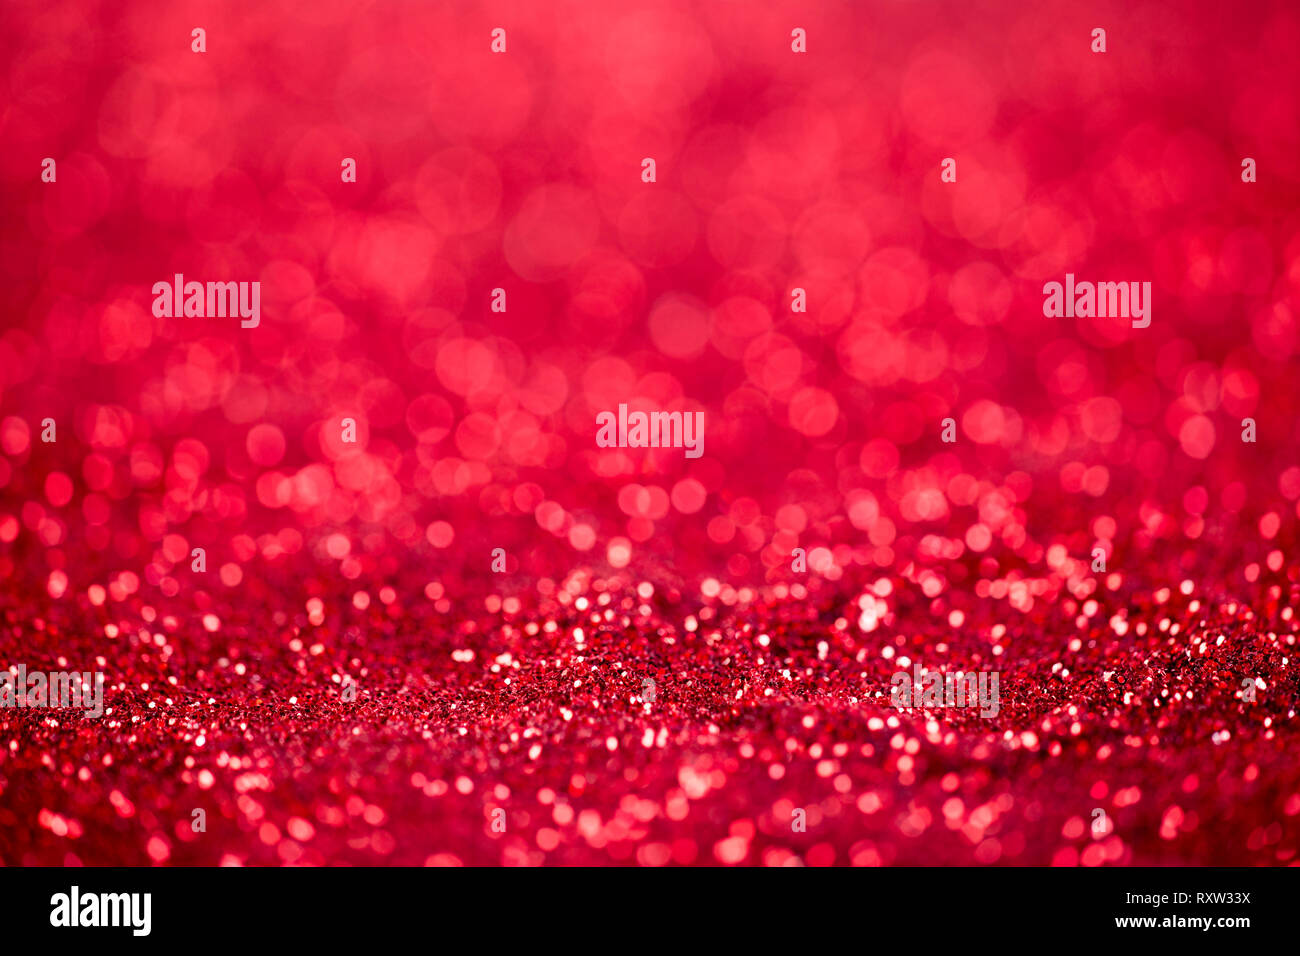 Red glitter christmas abstract background Stock Photo